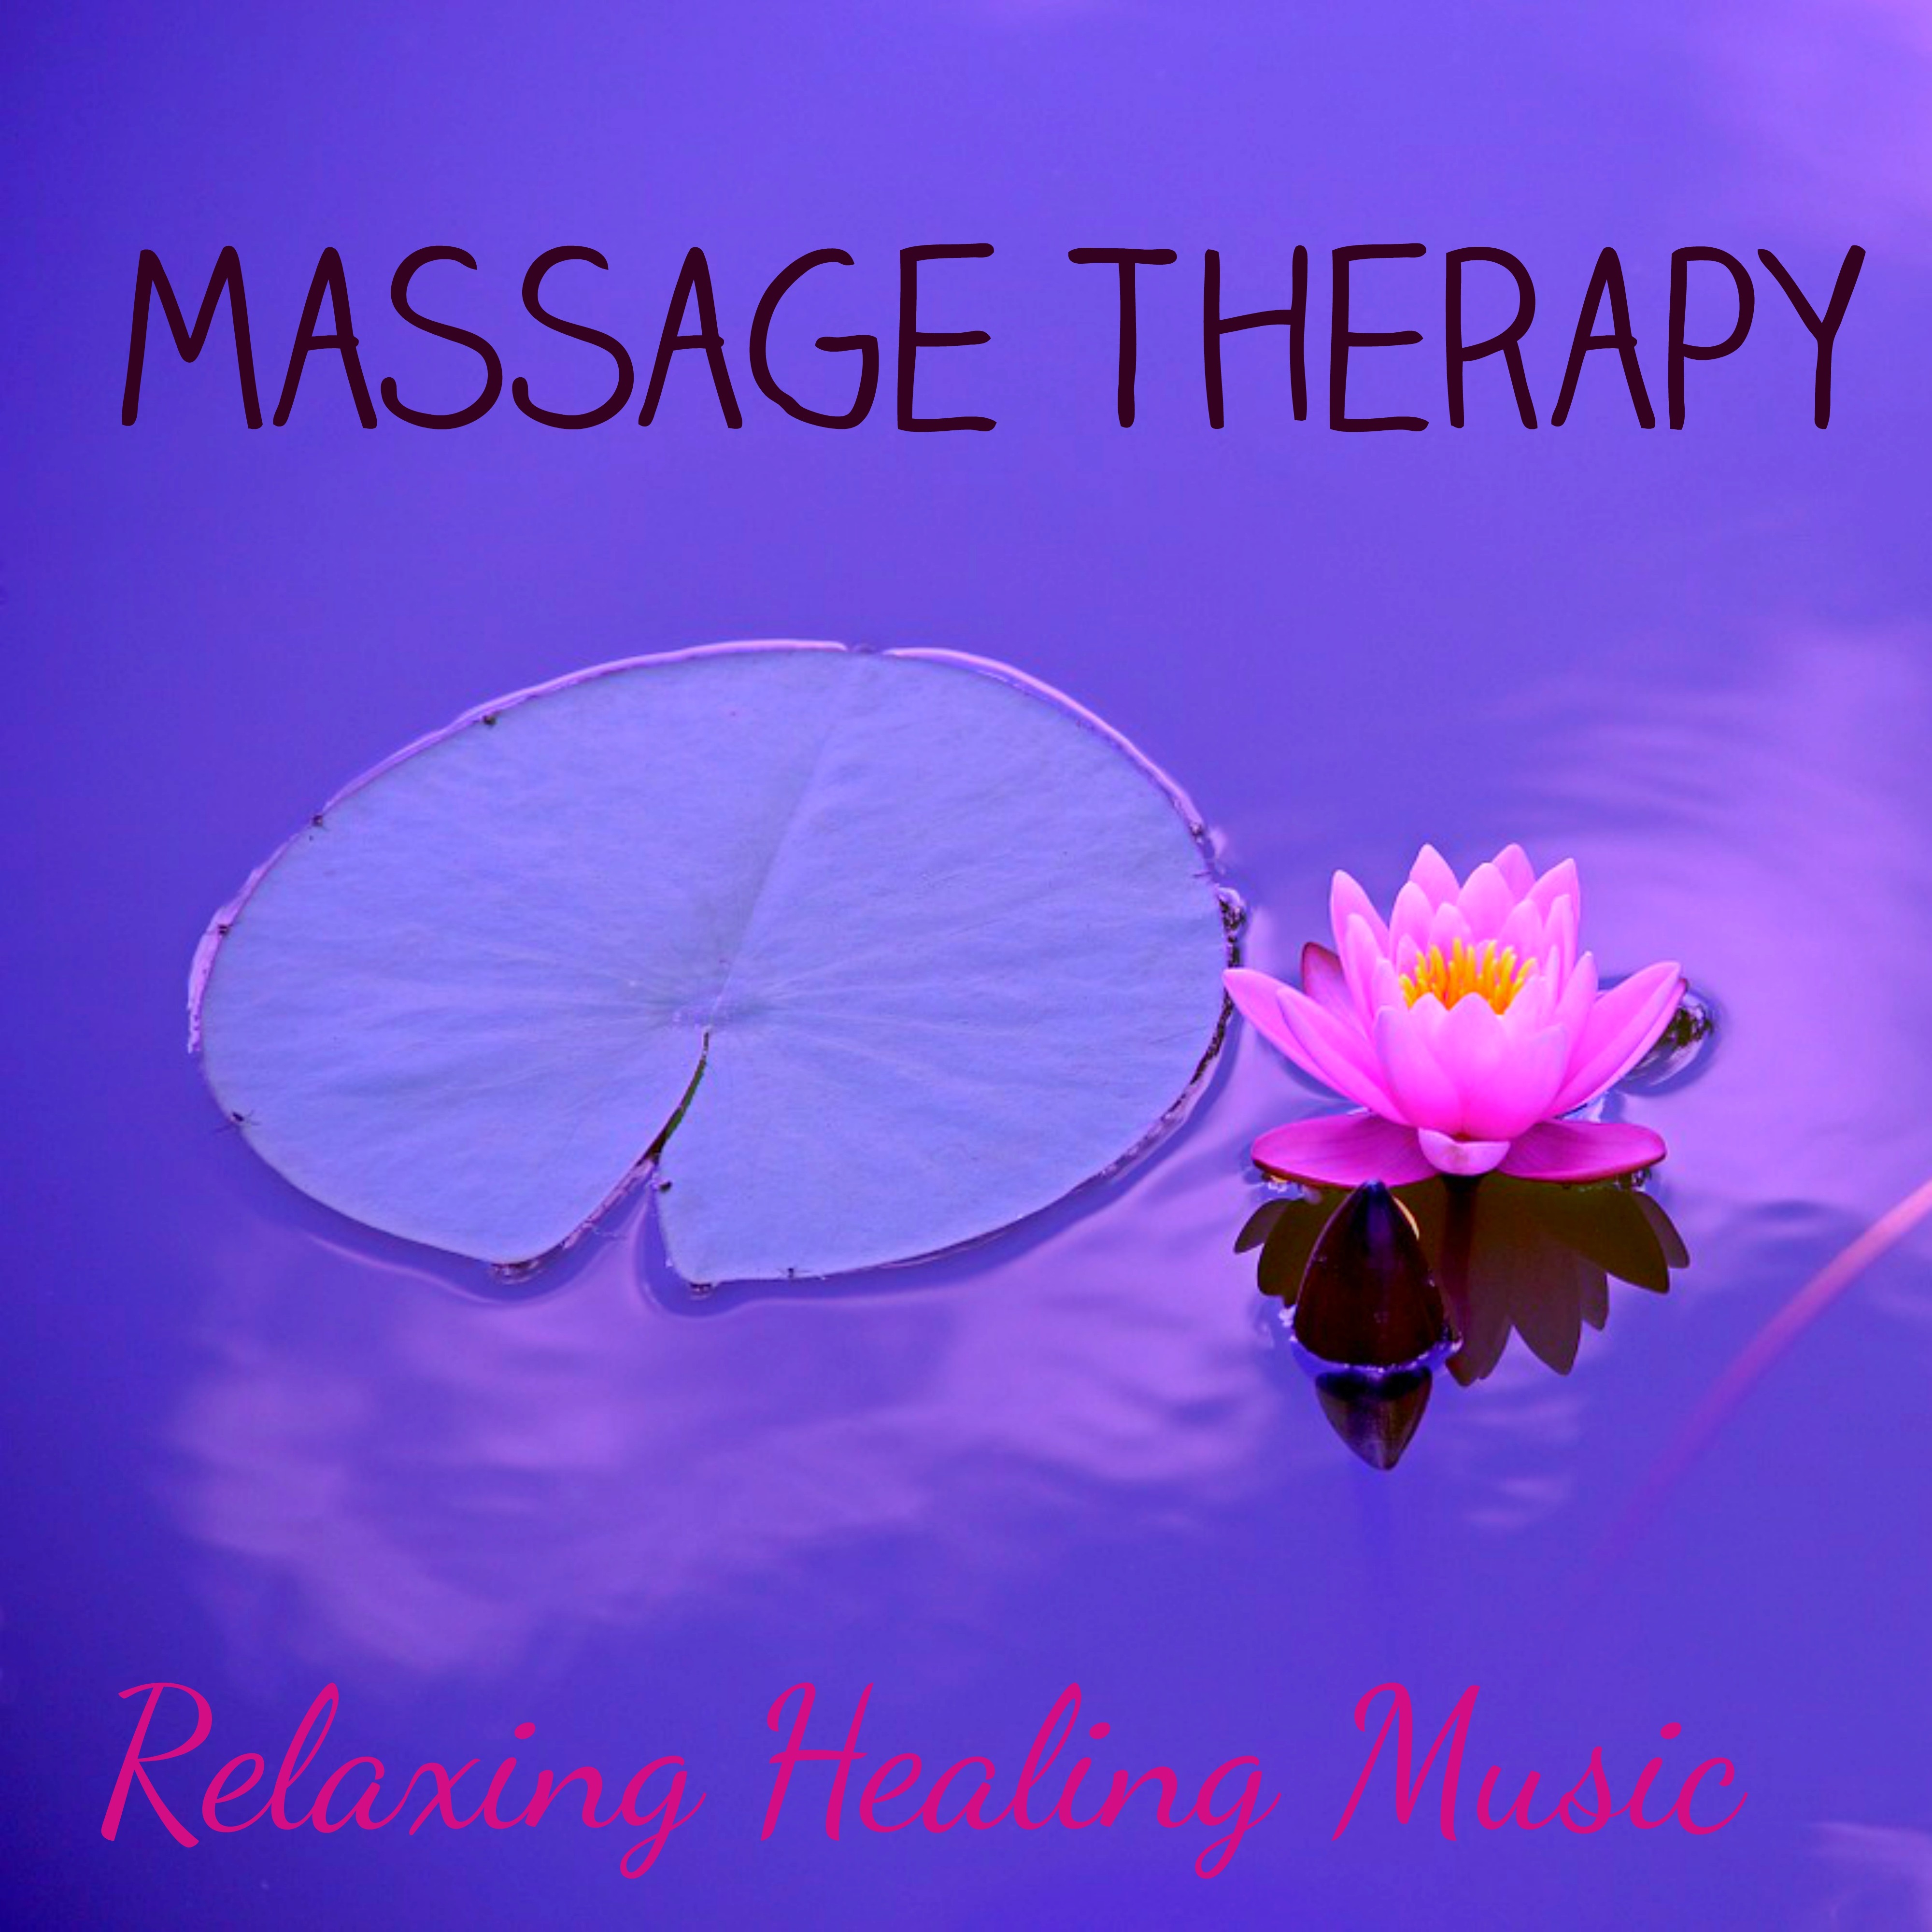 Massage Therapy - Relaxing Healing Music with Natural Instrumental Easy Listening Sounds